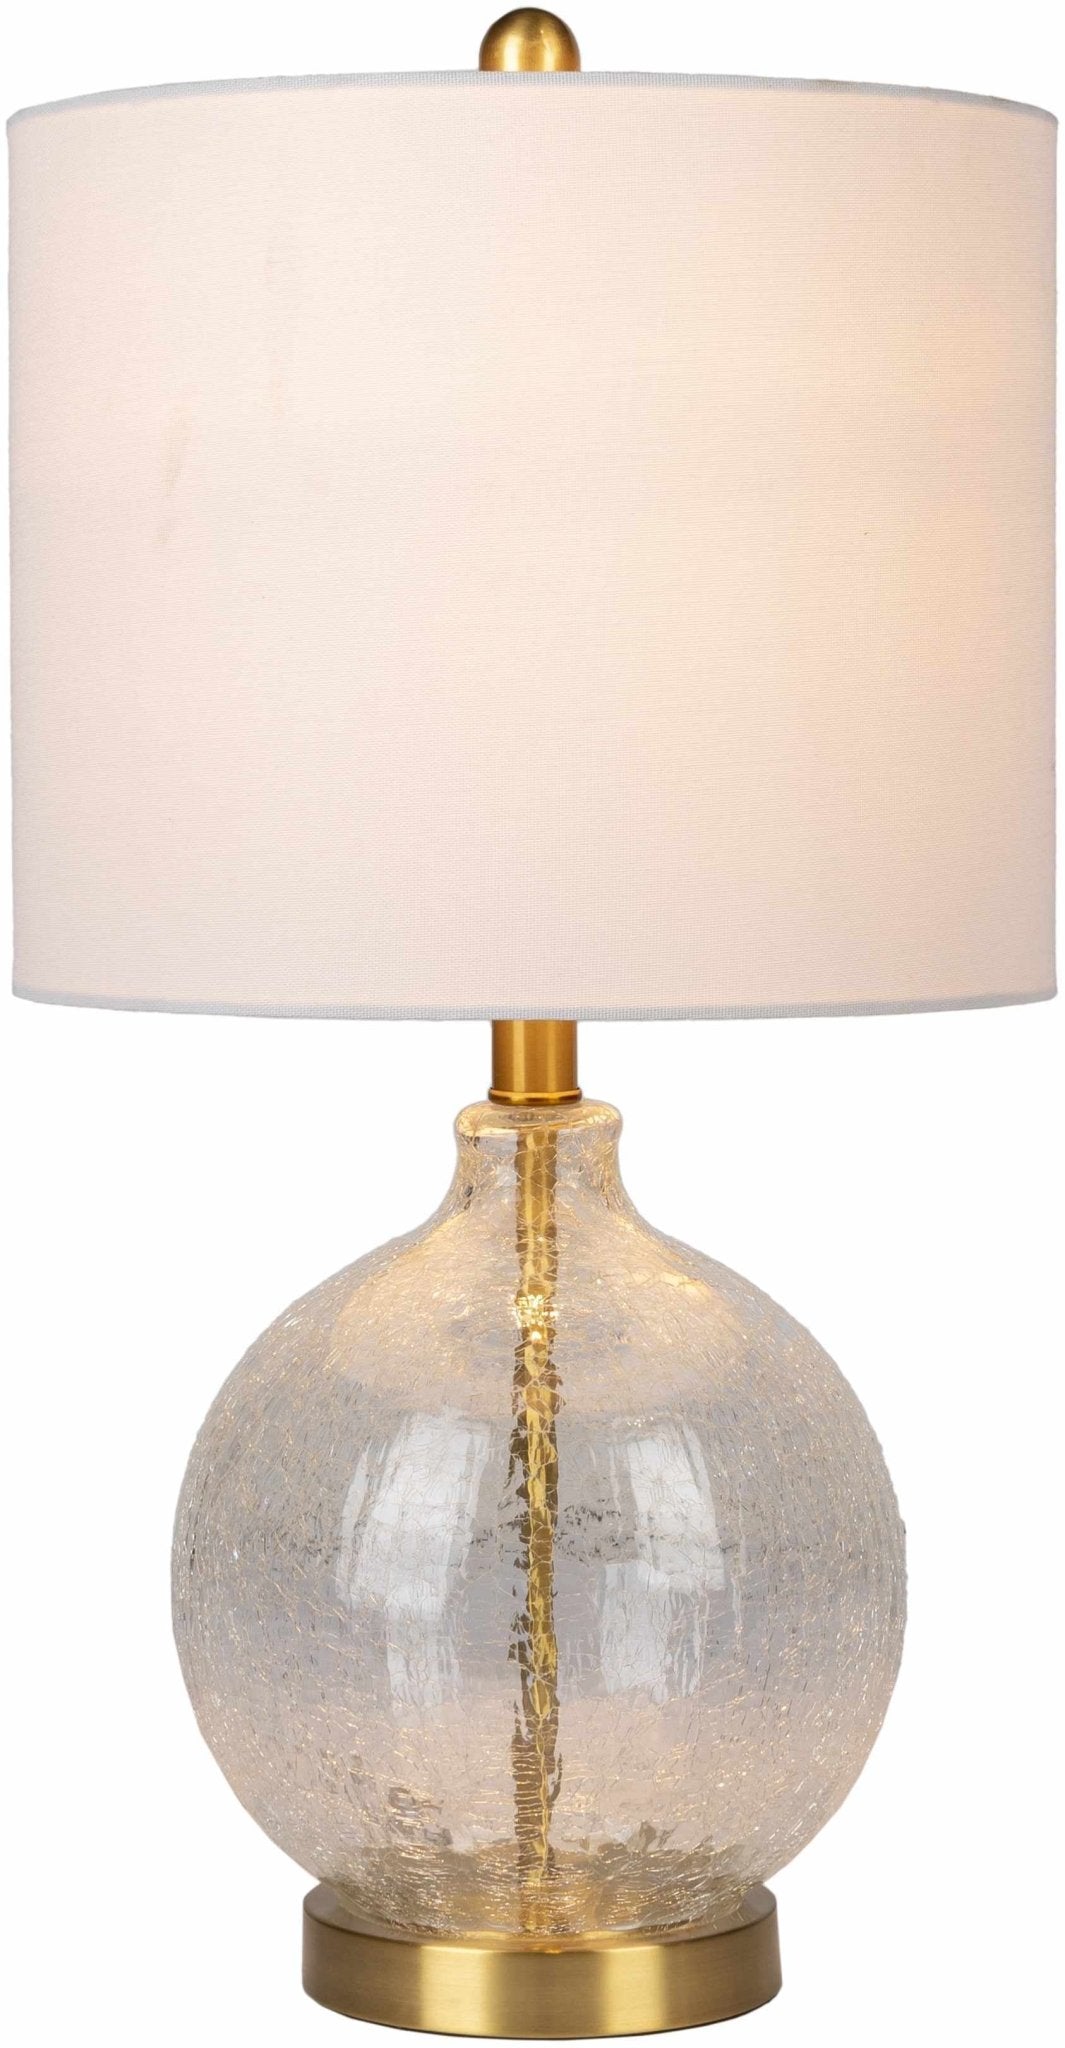 Ciel Table Lamp - Sweet Water Decor - Table Lamp